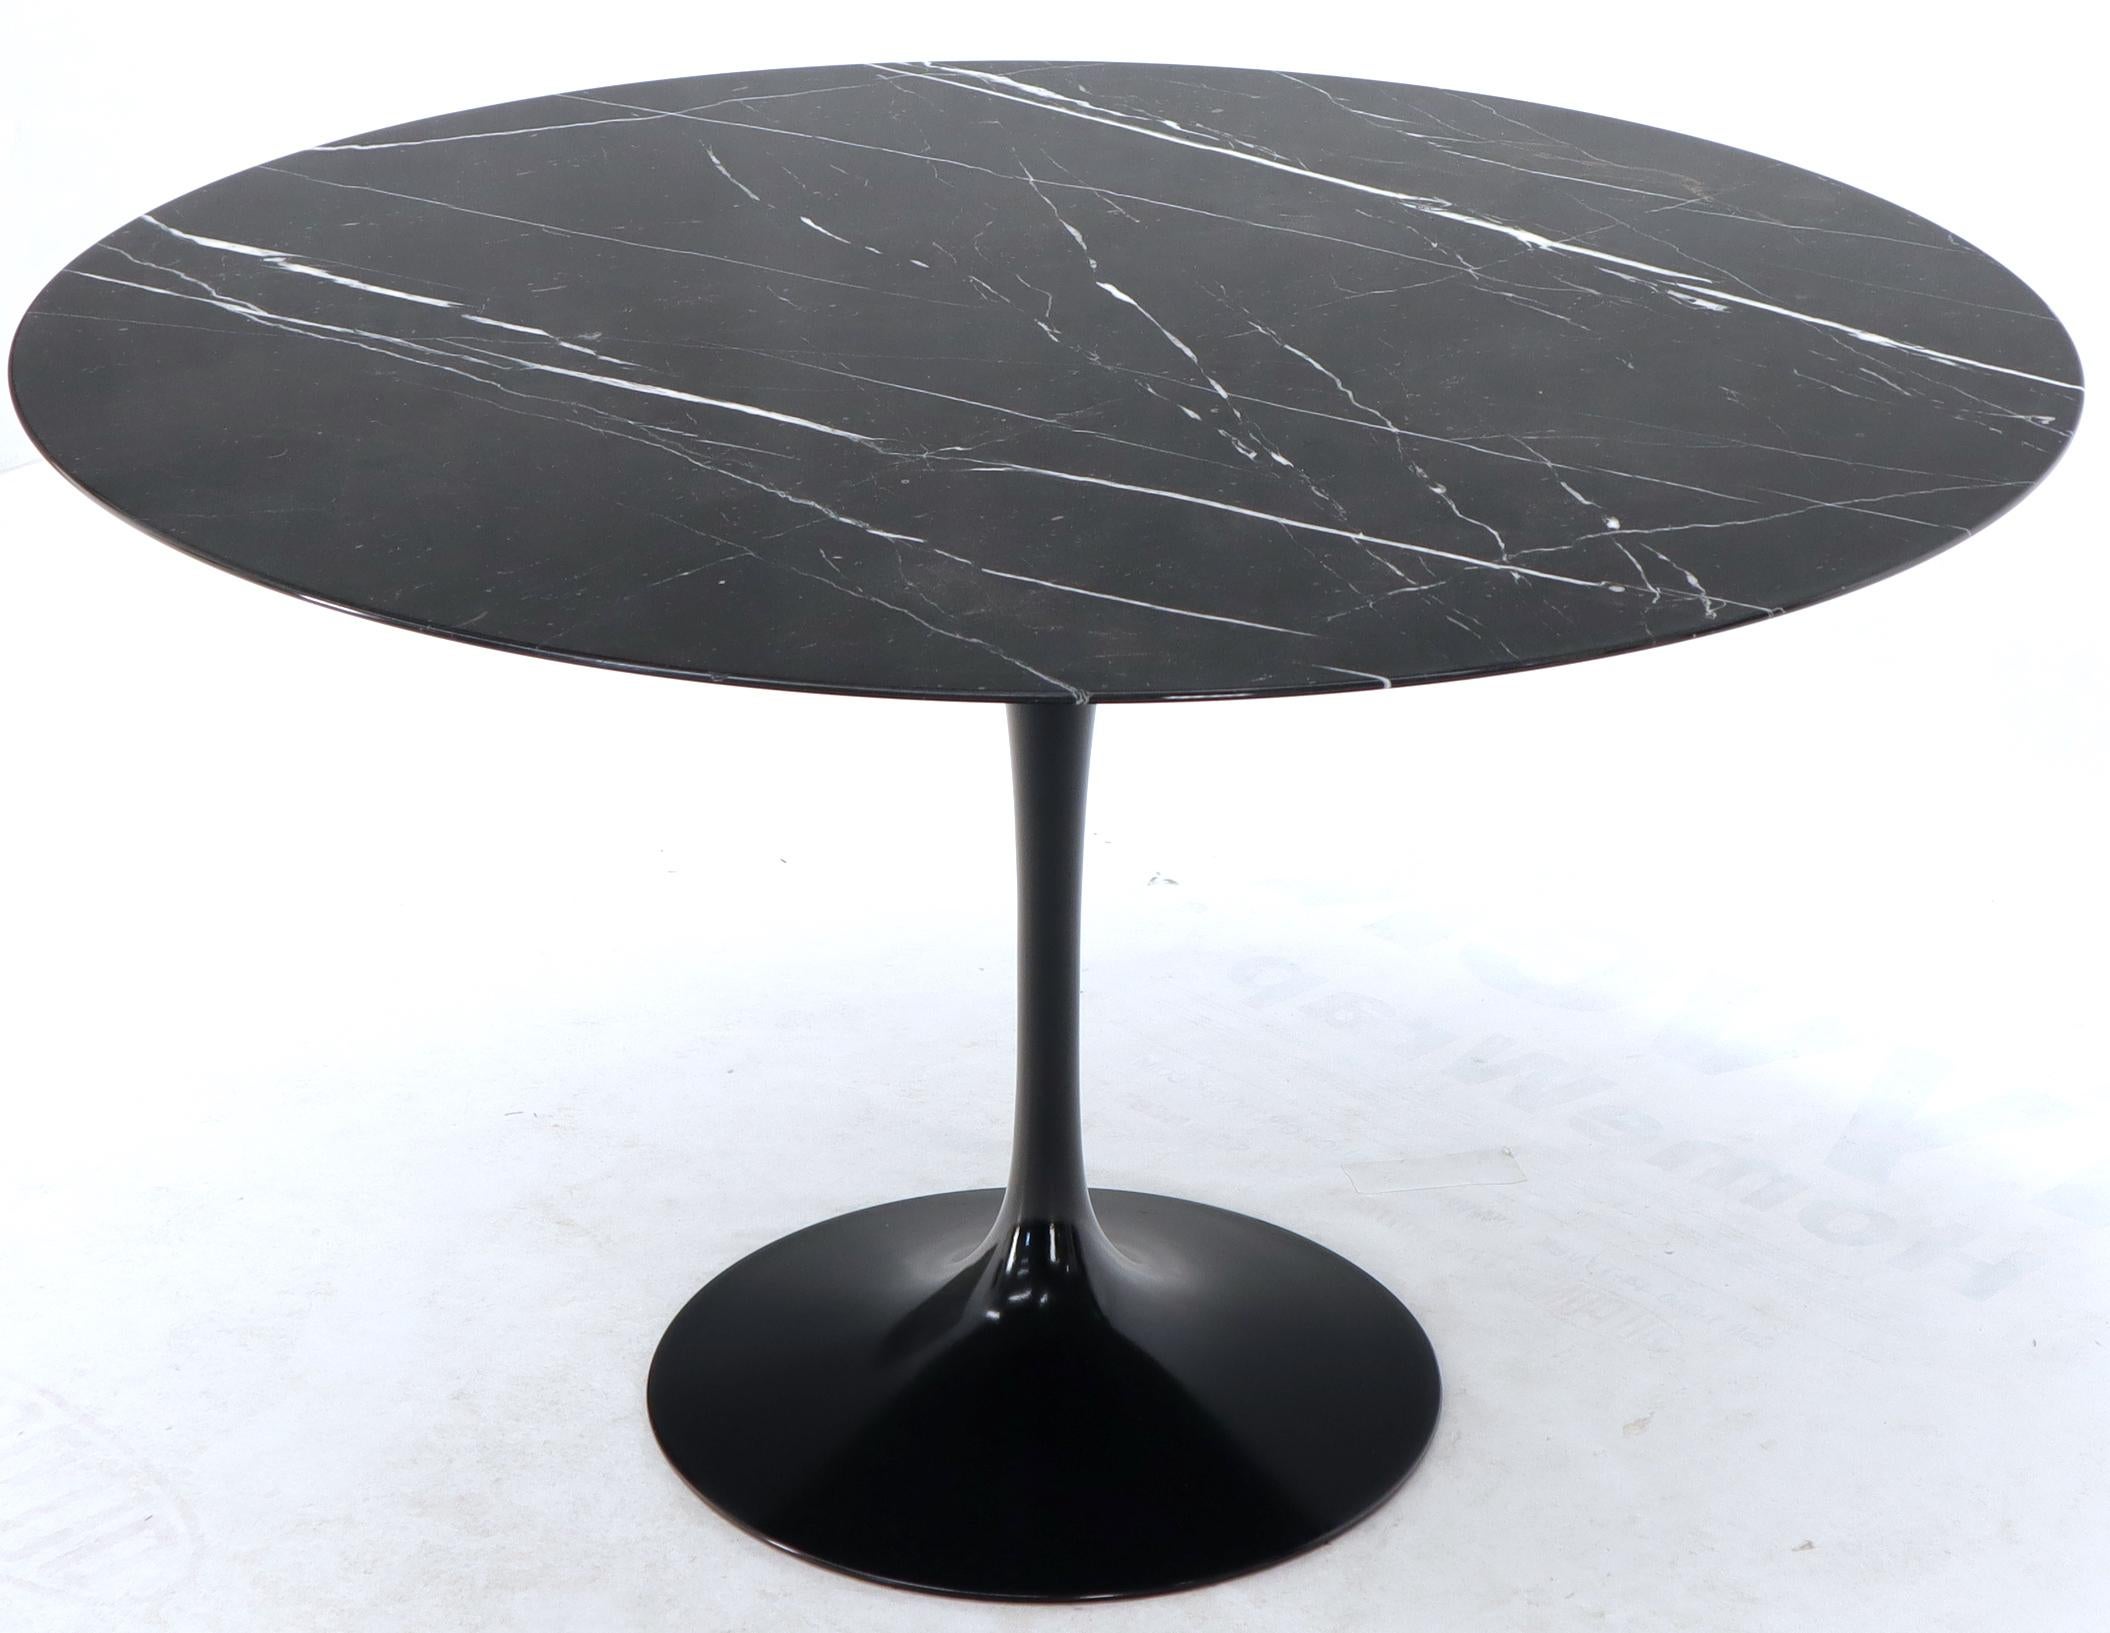 Mid-Century Modern Saarinen for Knoll round dining table. Like new condition. Measure: 48”.